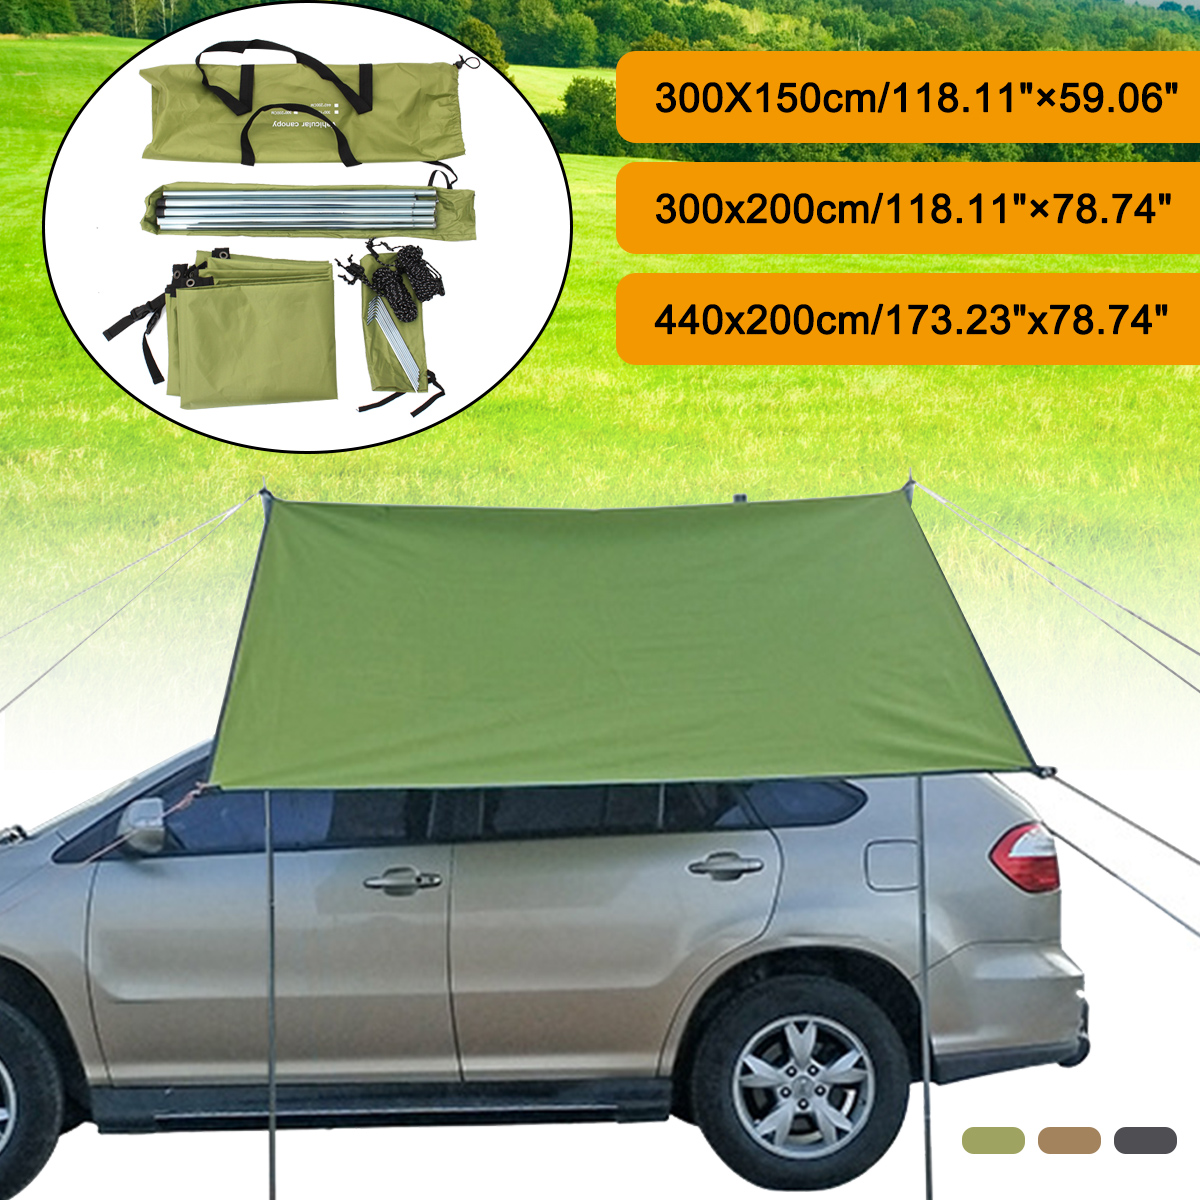 210D Oxford Cloth Car Side Awning Rooftop Tent Waterproof UV-proof Sunshade Canopy Cover Outdoor Camping Travel